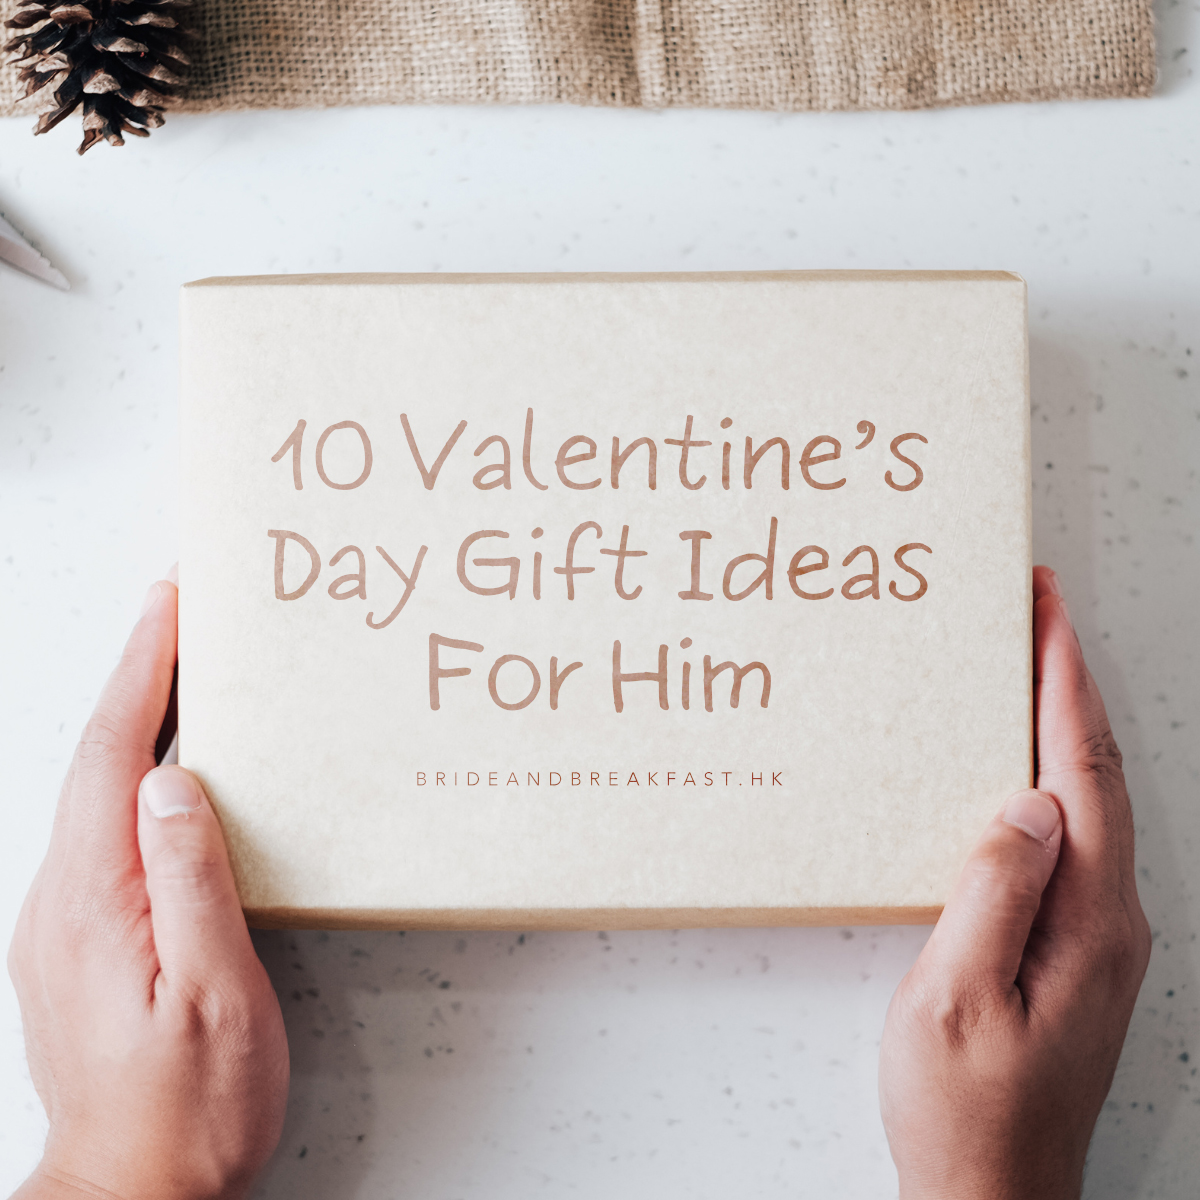 Easy And Meaningful Gifts You Can Make With Little Or No Money At All -  Cultura Colectiva | Homemade gifts for girlfriend, Homemade gifts for  boyfriend, Cheap homemade christmas gifts